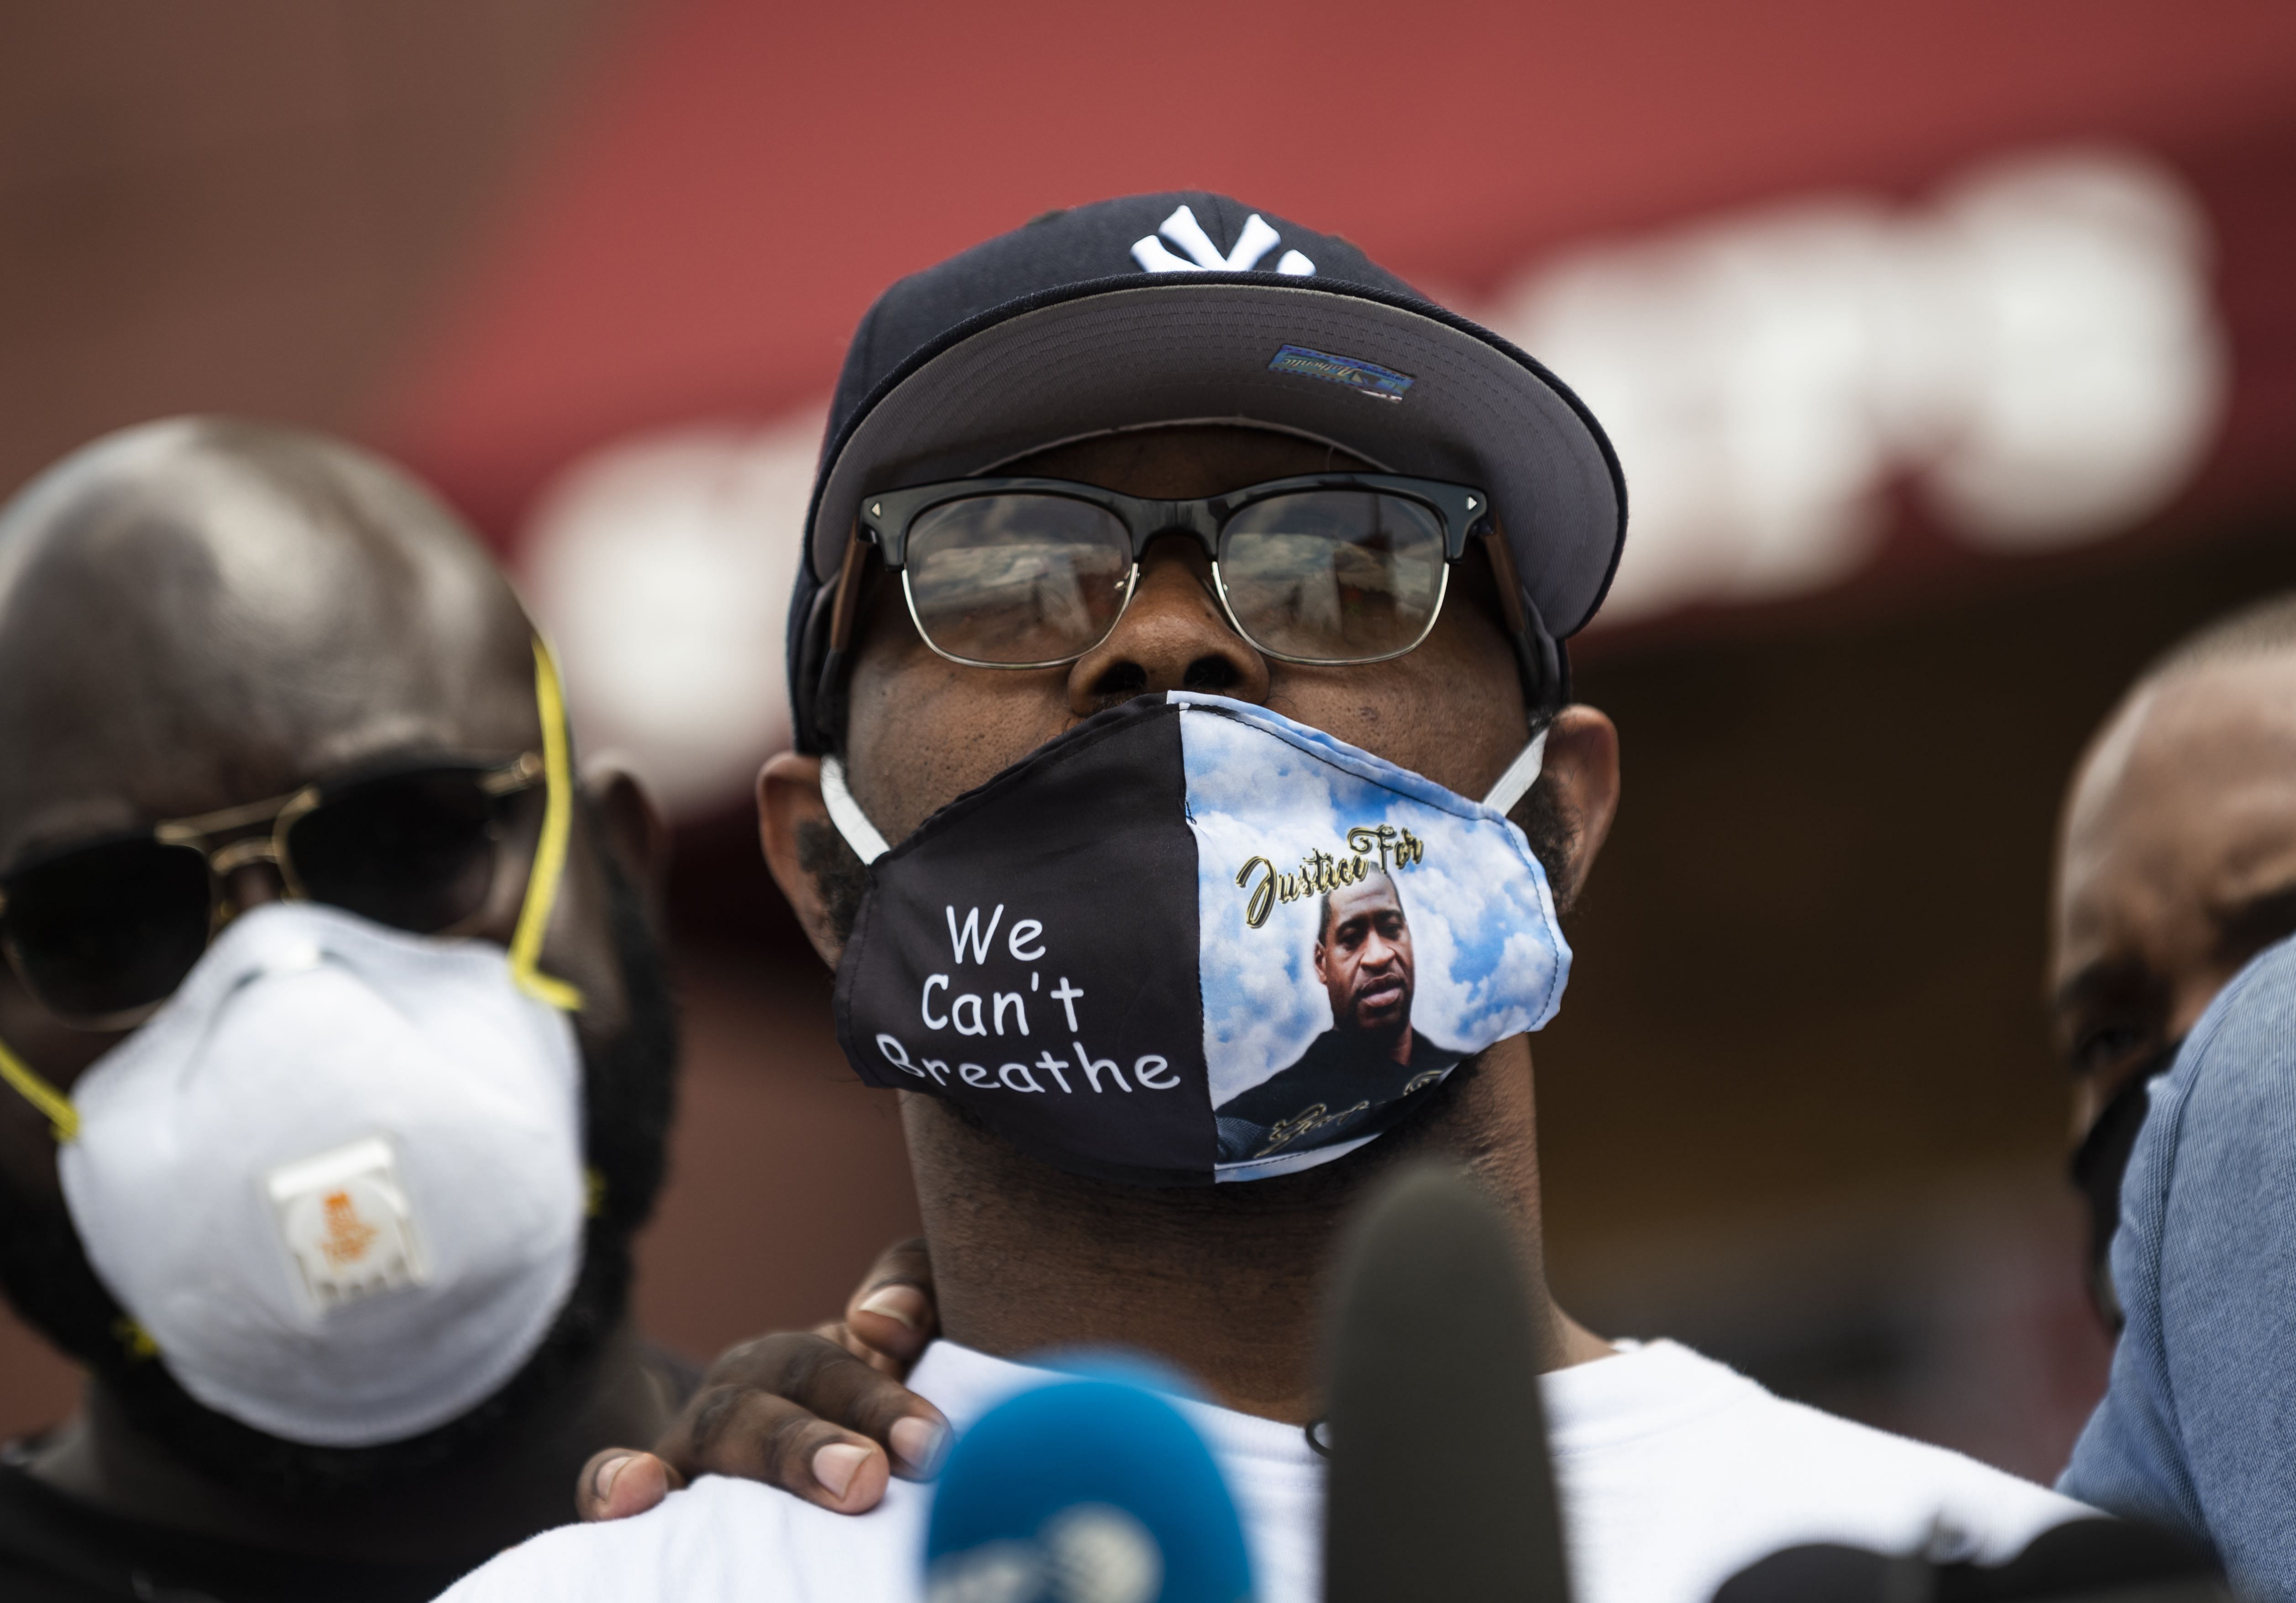 Terrence Floyd (C) arrives at the site where his brother George Floyd was killed by police one week ago on June 1, 2020 in Minneapolis, Minnesota. (Credit: AFP Photo)